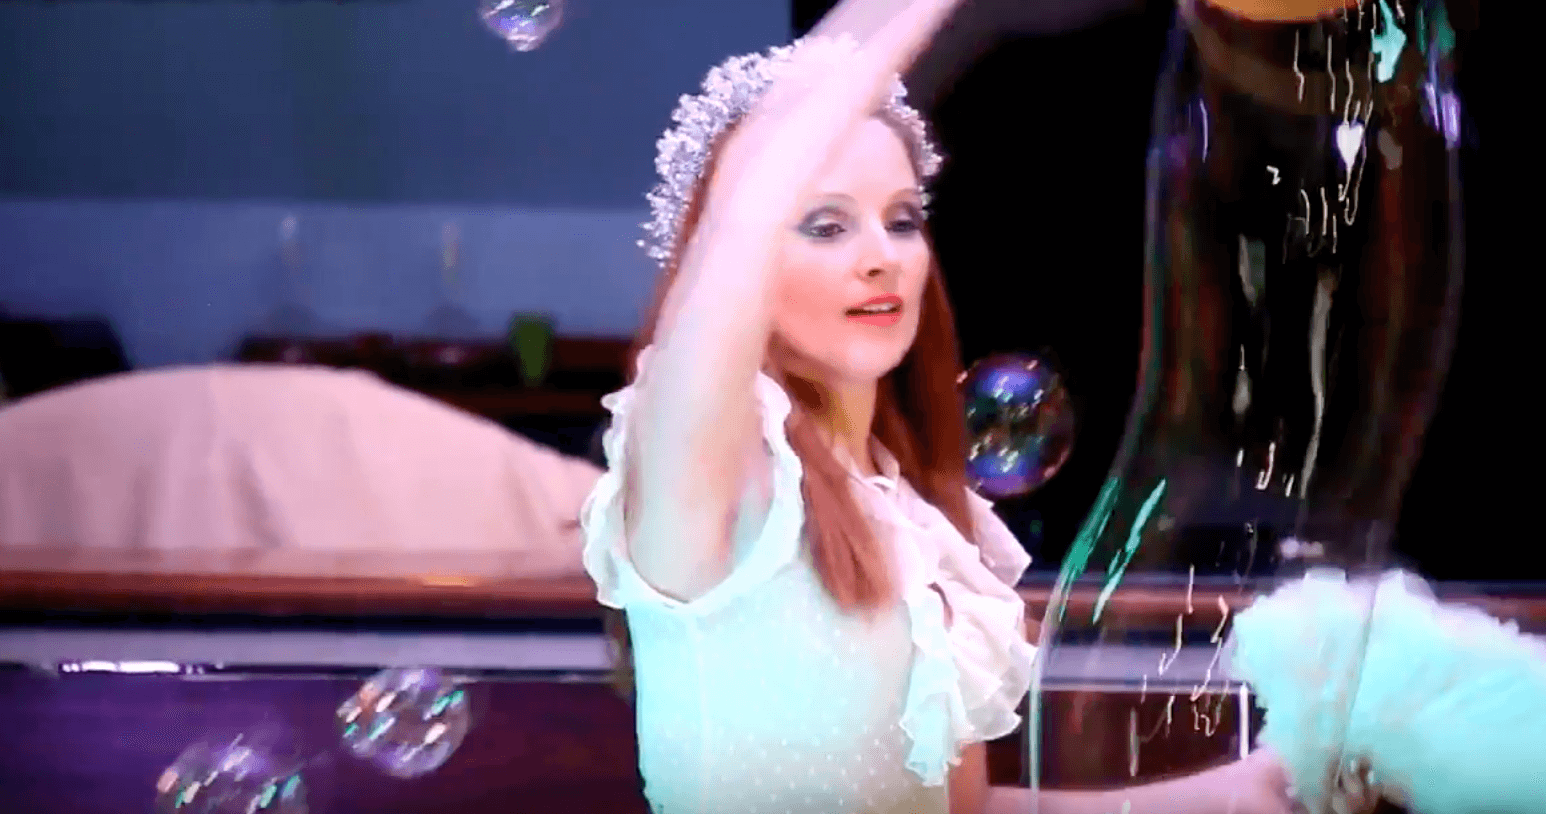 The BEST Female Bubble Performer For Events